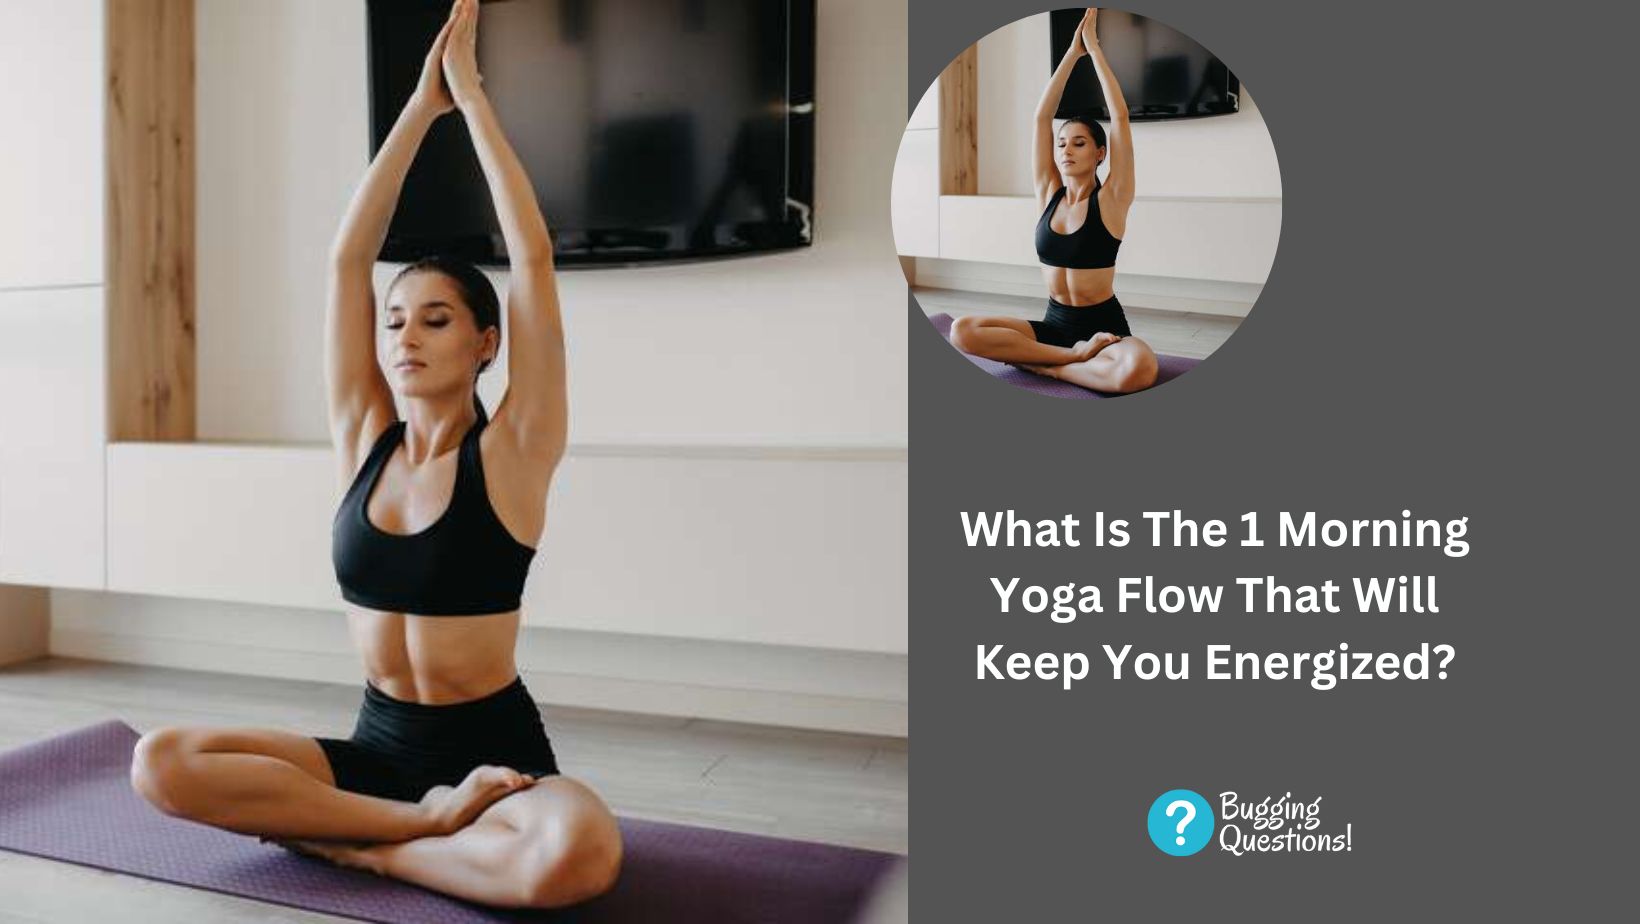 What Is The 1 Morning Yoga Flow That Will Keep You Energized?